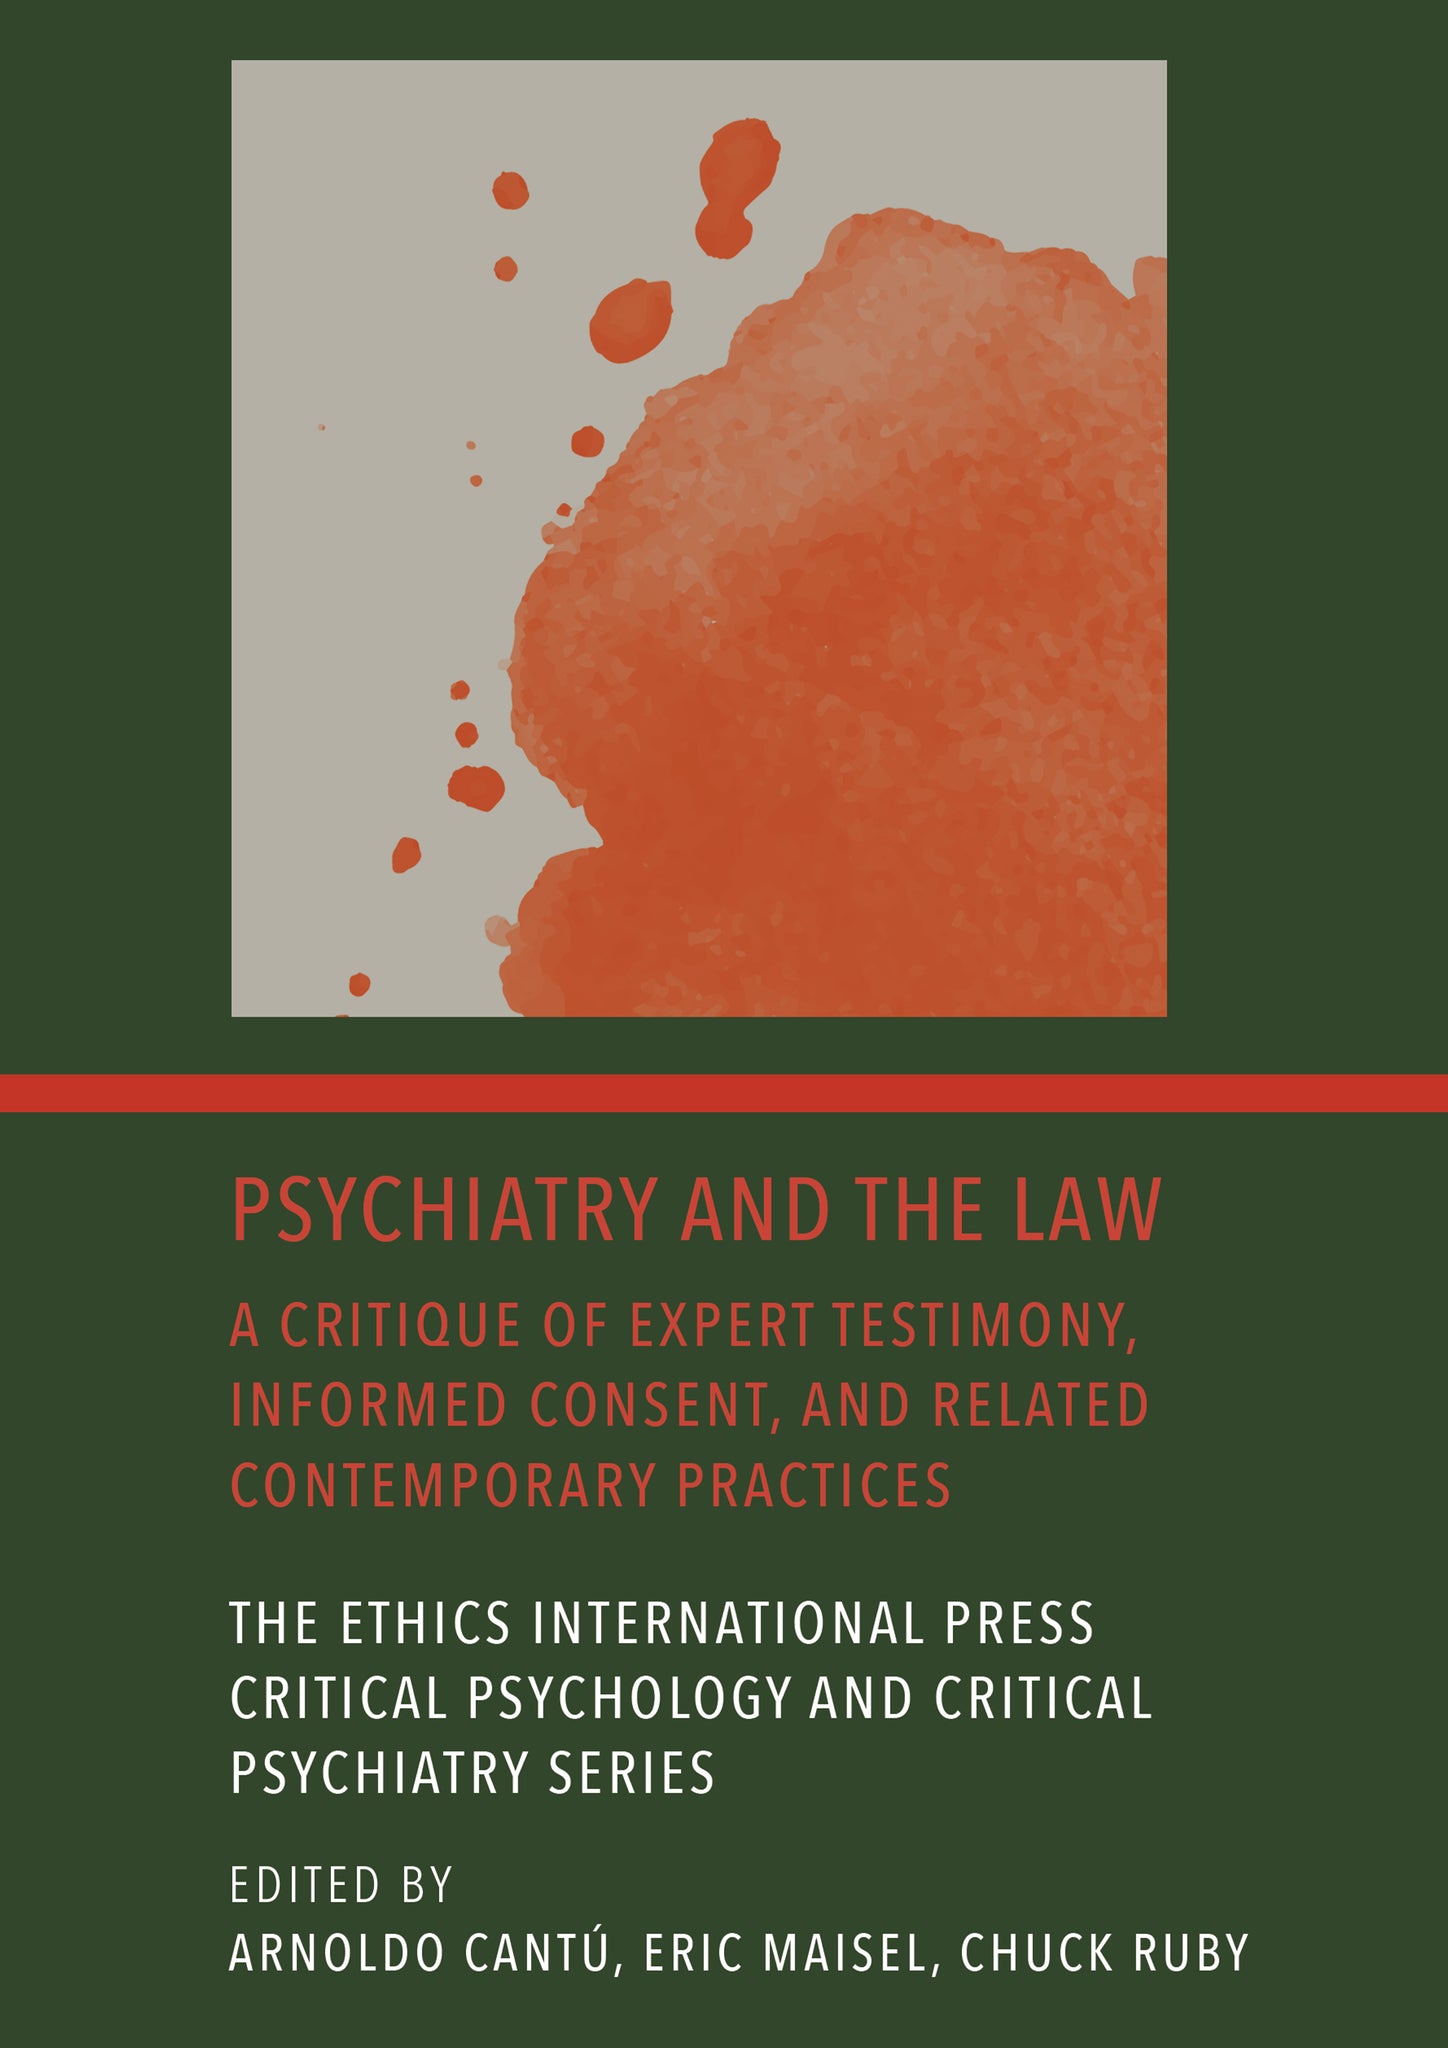 Psychiatry and the Law: A Critique of Expert Testimony, Informed Consent, and Related Contemporary Practices